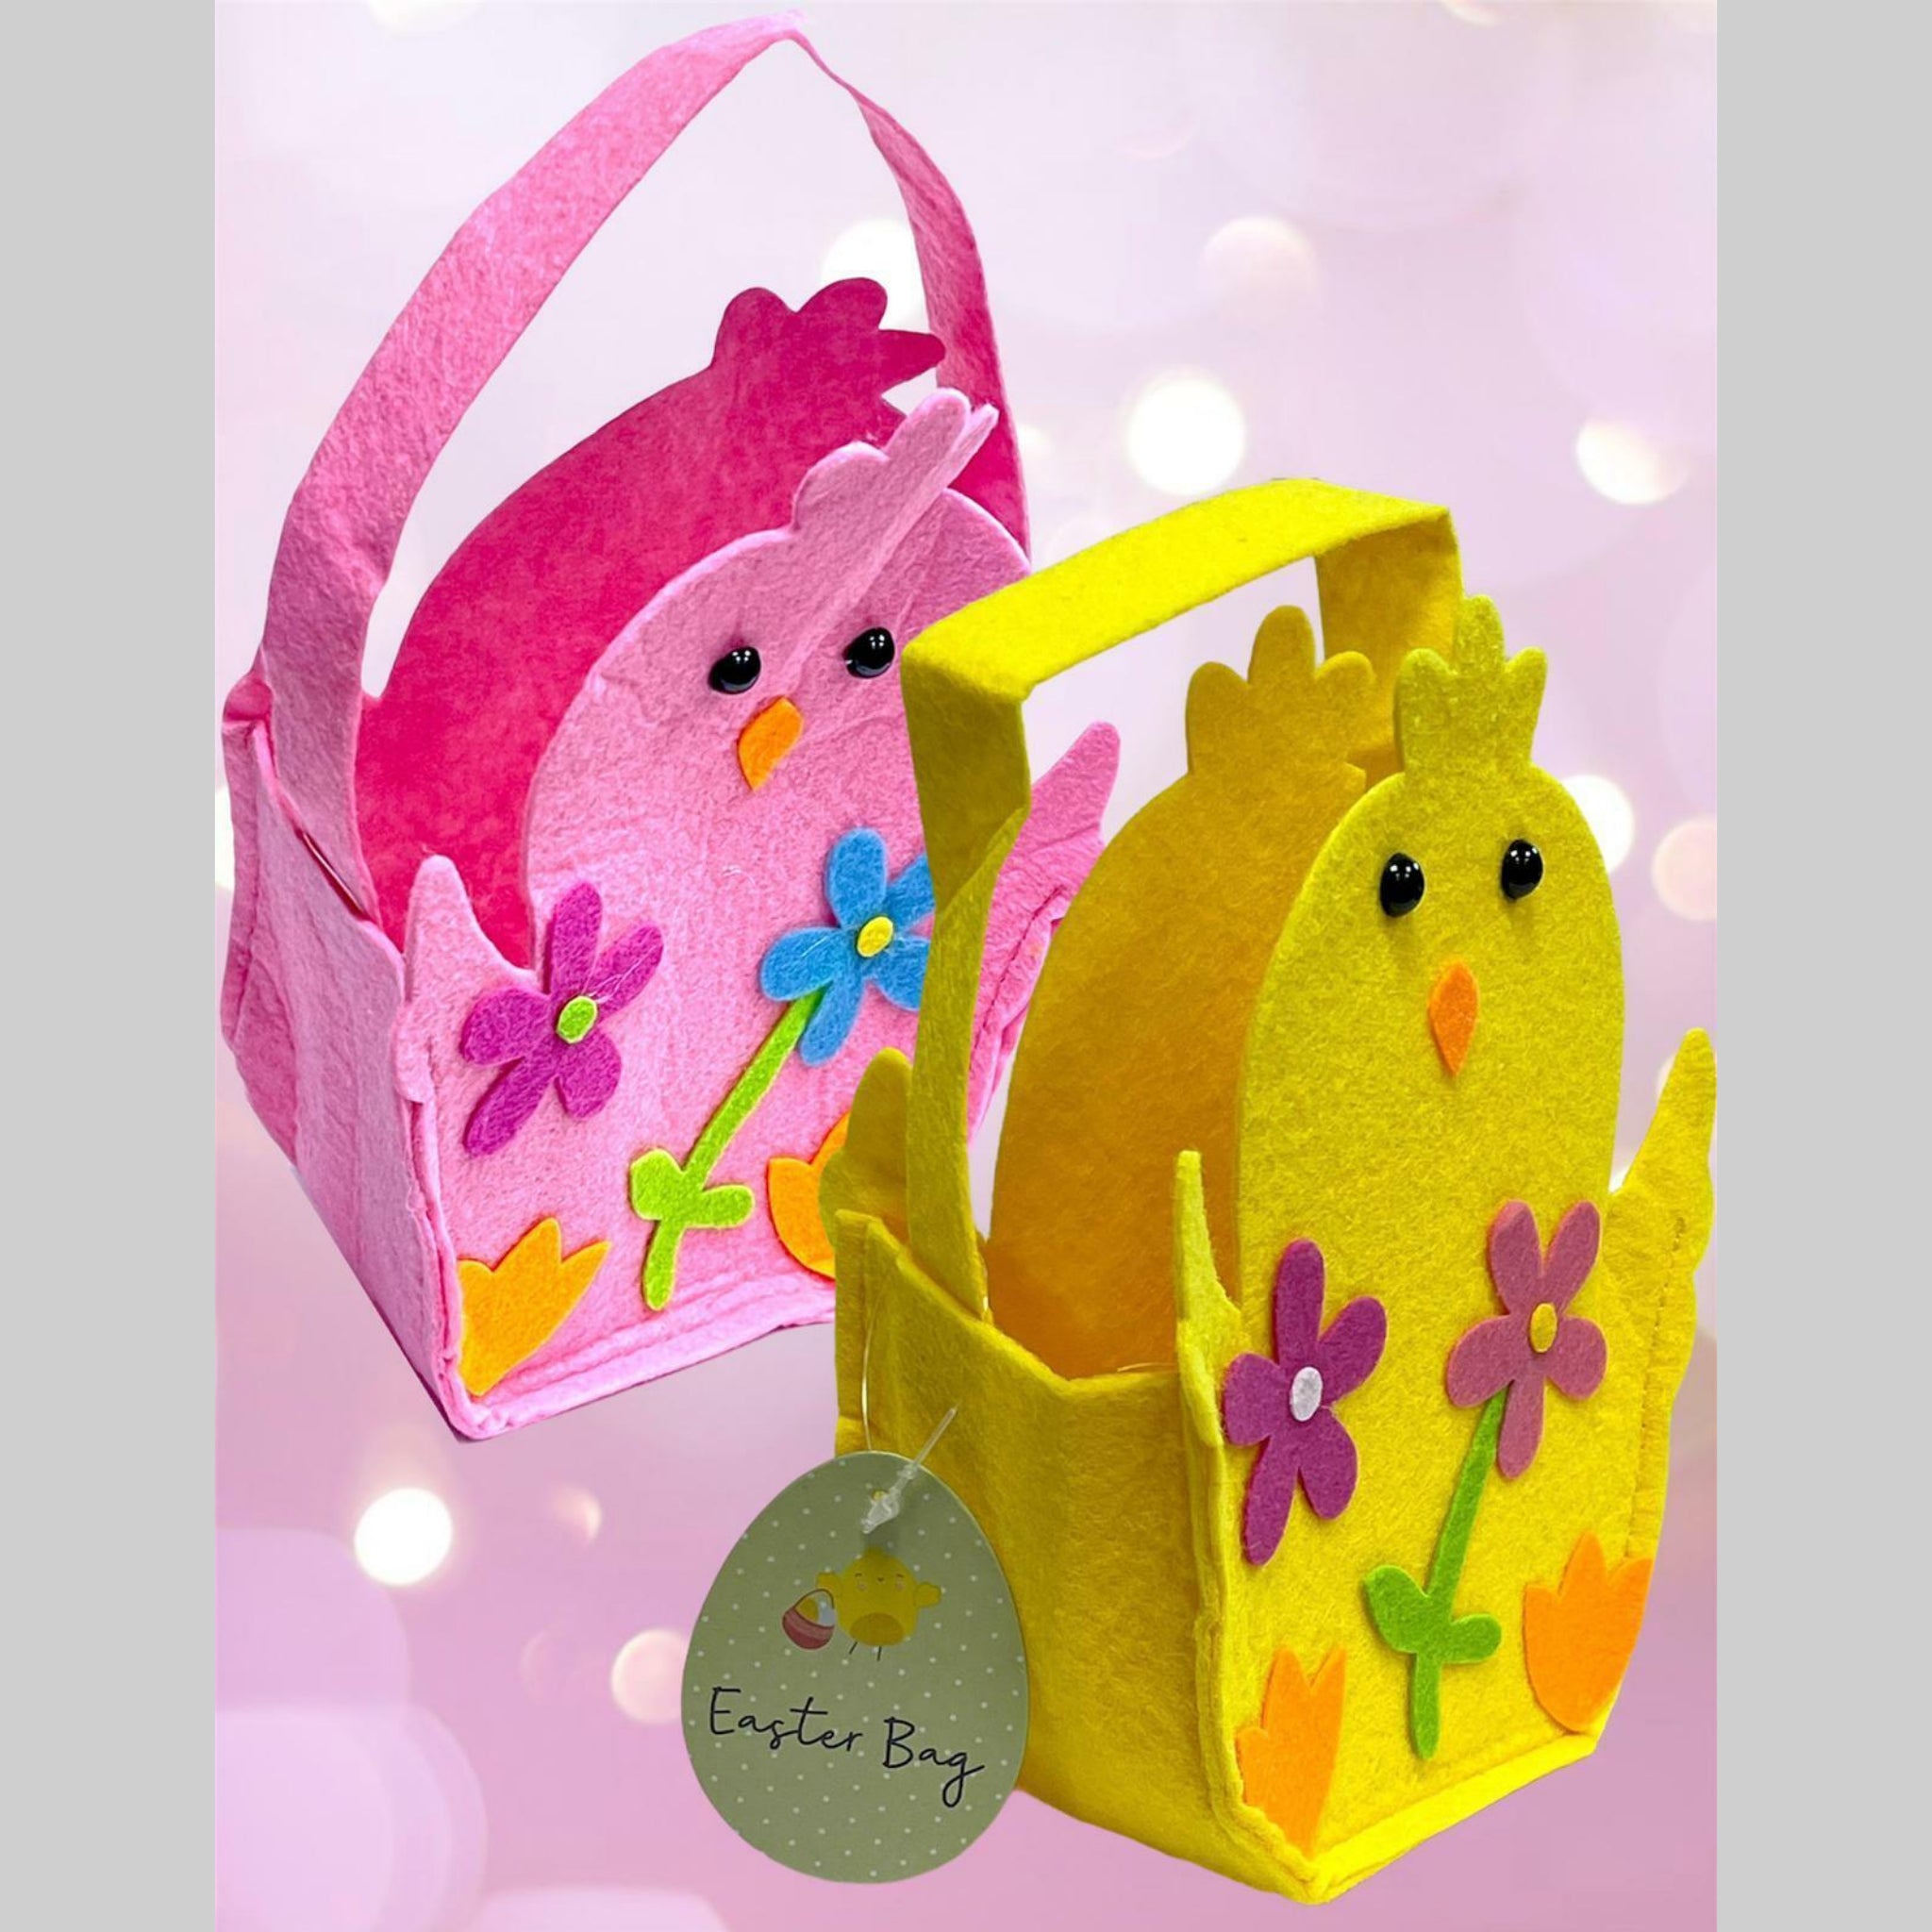 Beclen Harp Easter Chick/Bunny Treat Soft Felt Bucket/Basket With Handle For Party Decoration-Perfect Easter Gift For Kids